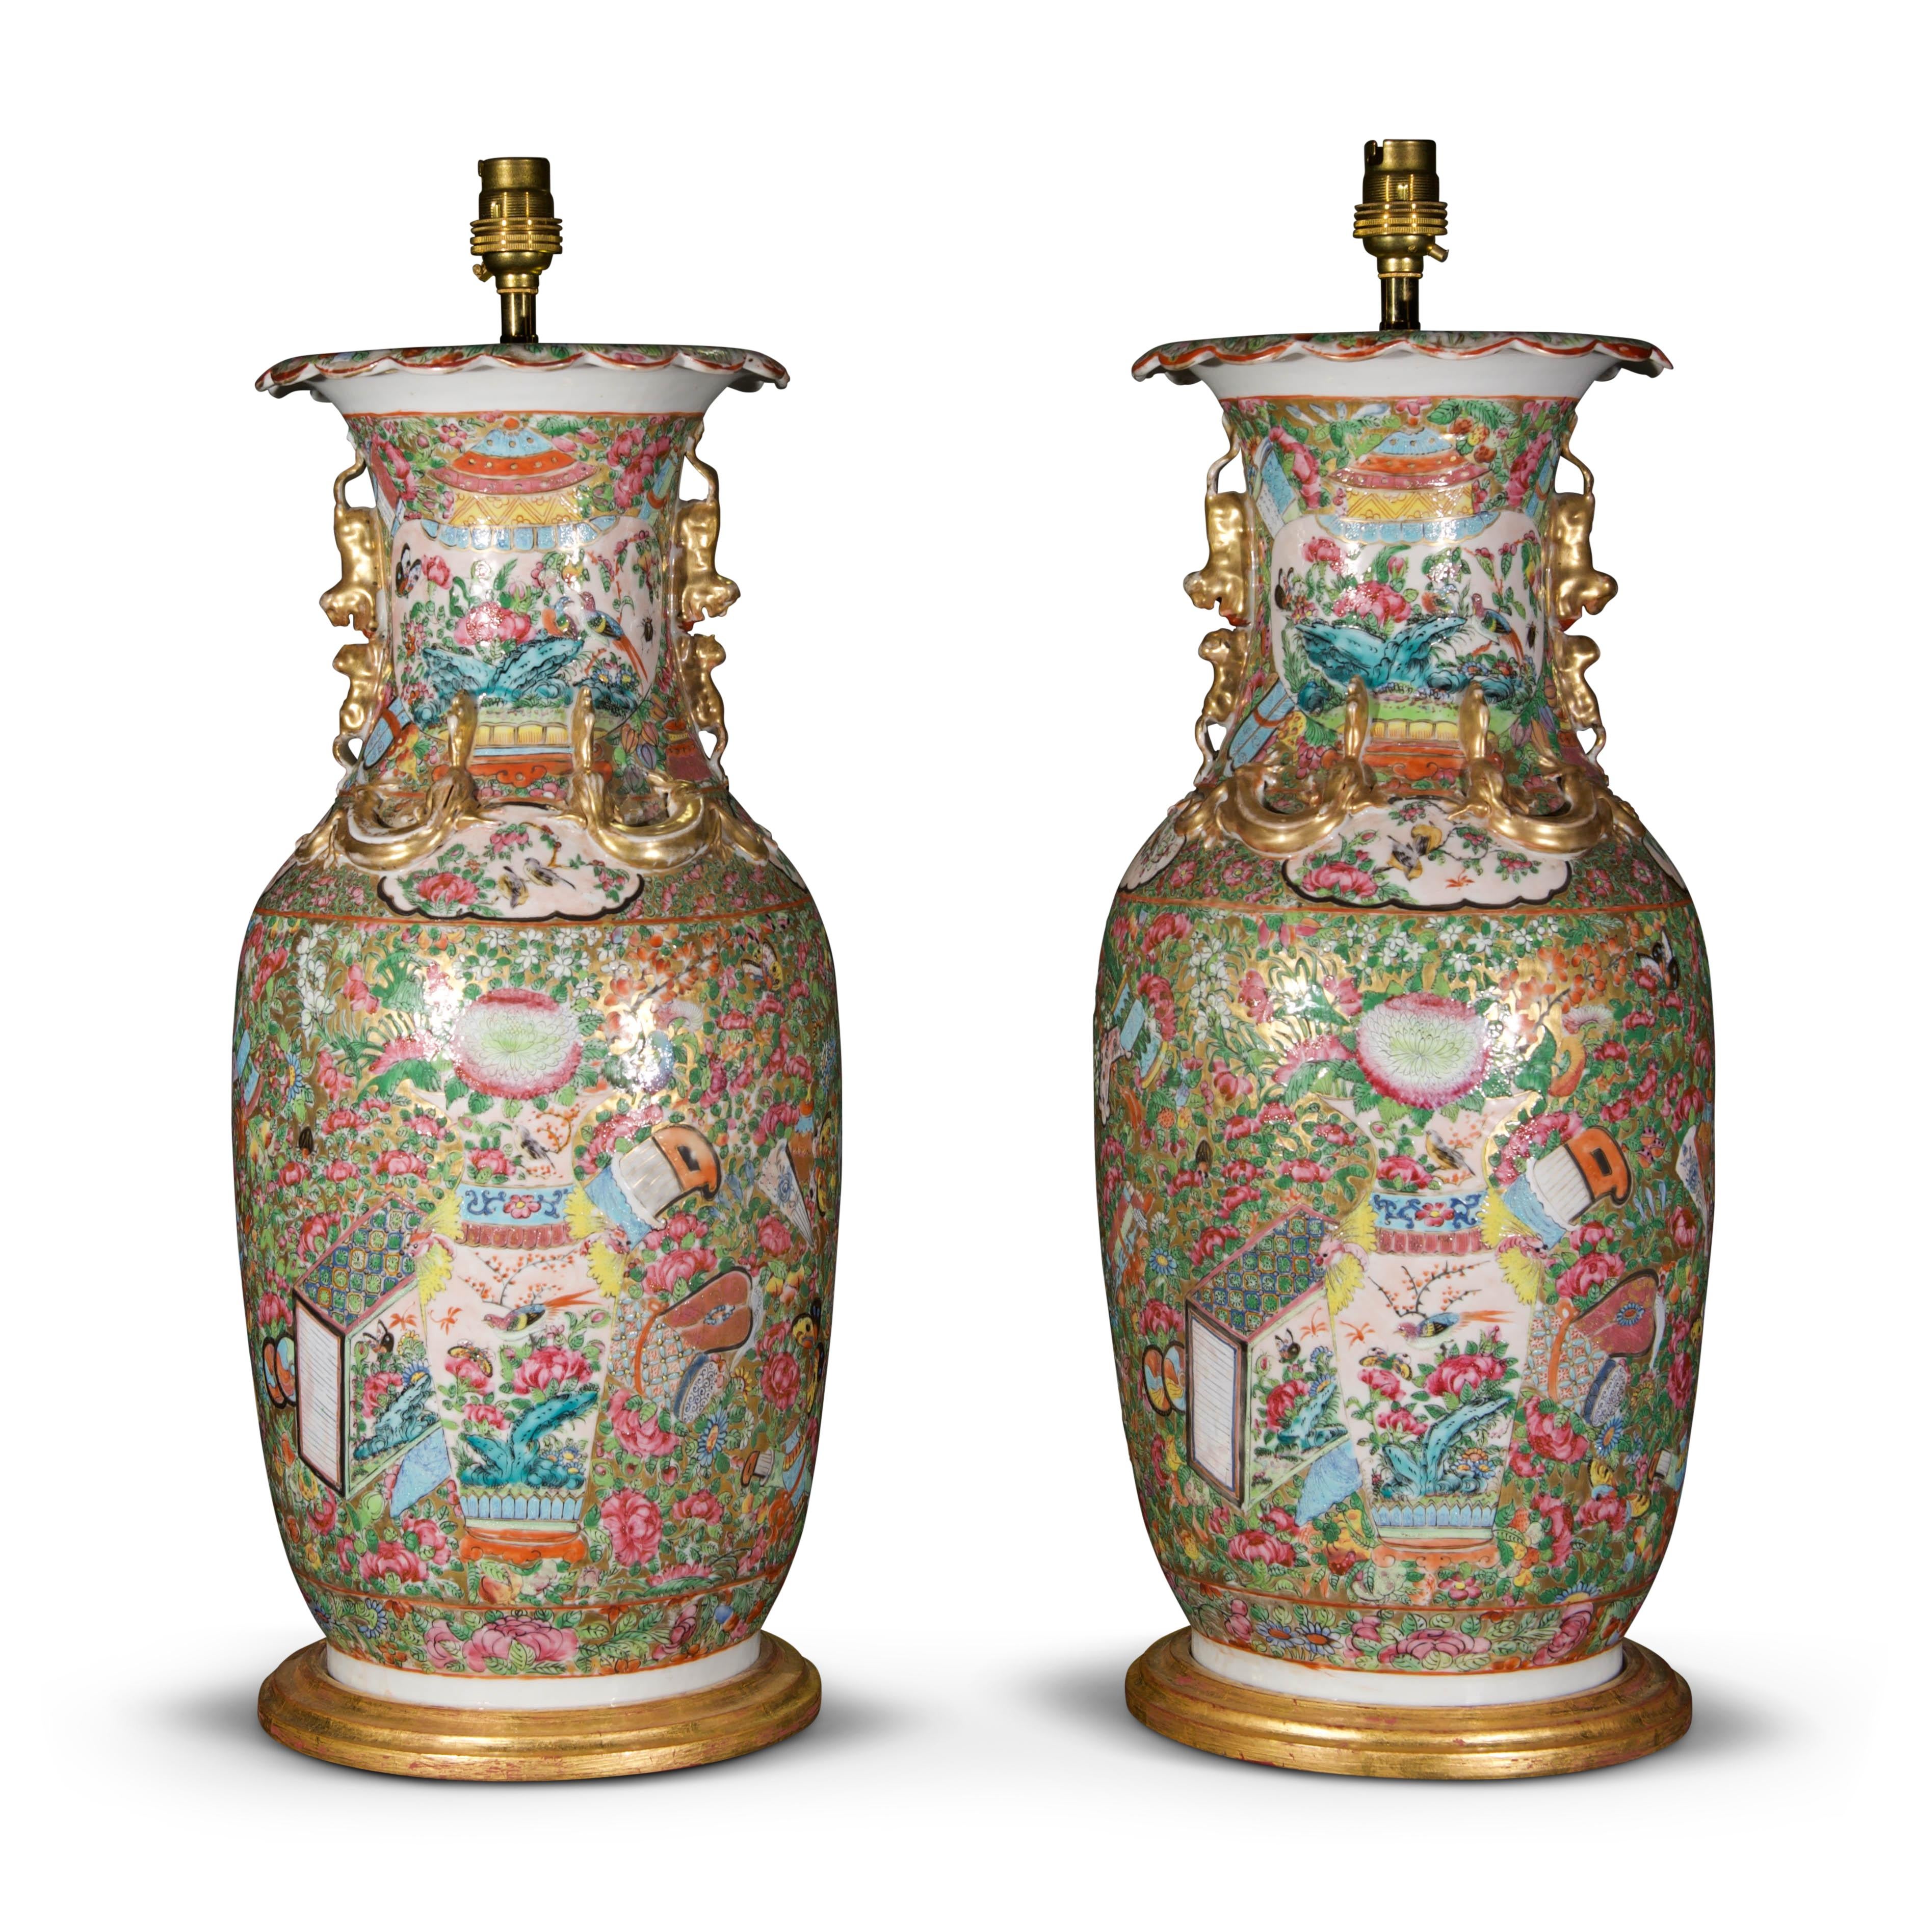 Pair of 19th Century Chinese Canton Baluster Porcelain Antique Table Lamps 1